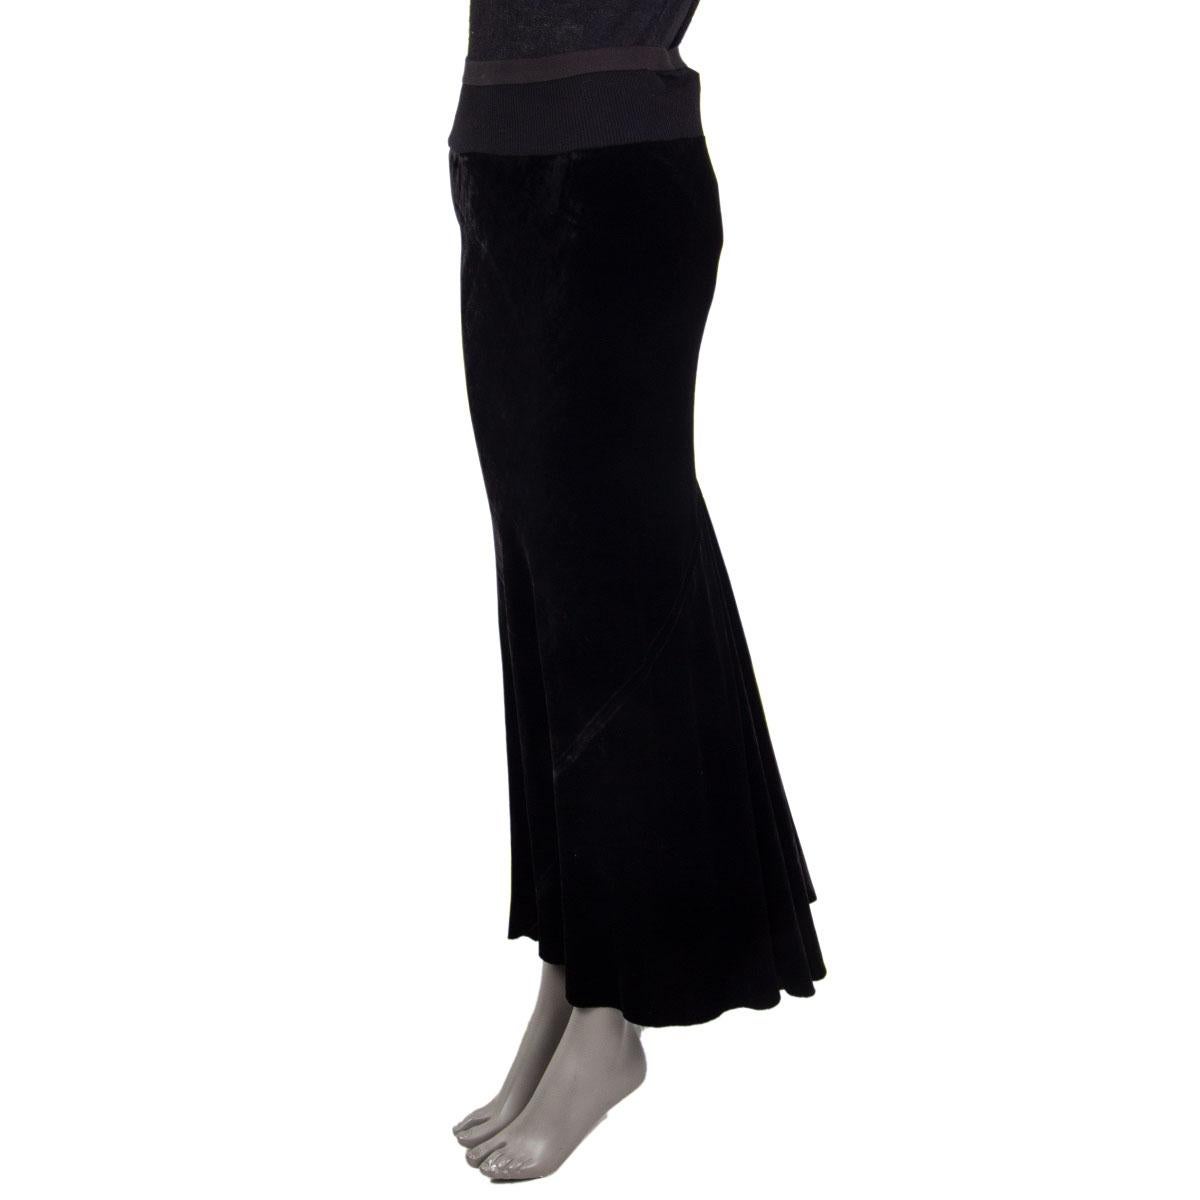 Rick Owens paneled maxi skirt in black velvet viscose (80%) and silk (20%) with ribbed waist band in black cotton (65%) and polyamide (35%). Paneled detail on the back. Has been worn and it is in excellent condition.

Tag Size 42
Size M
Waist 70cm